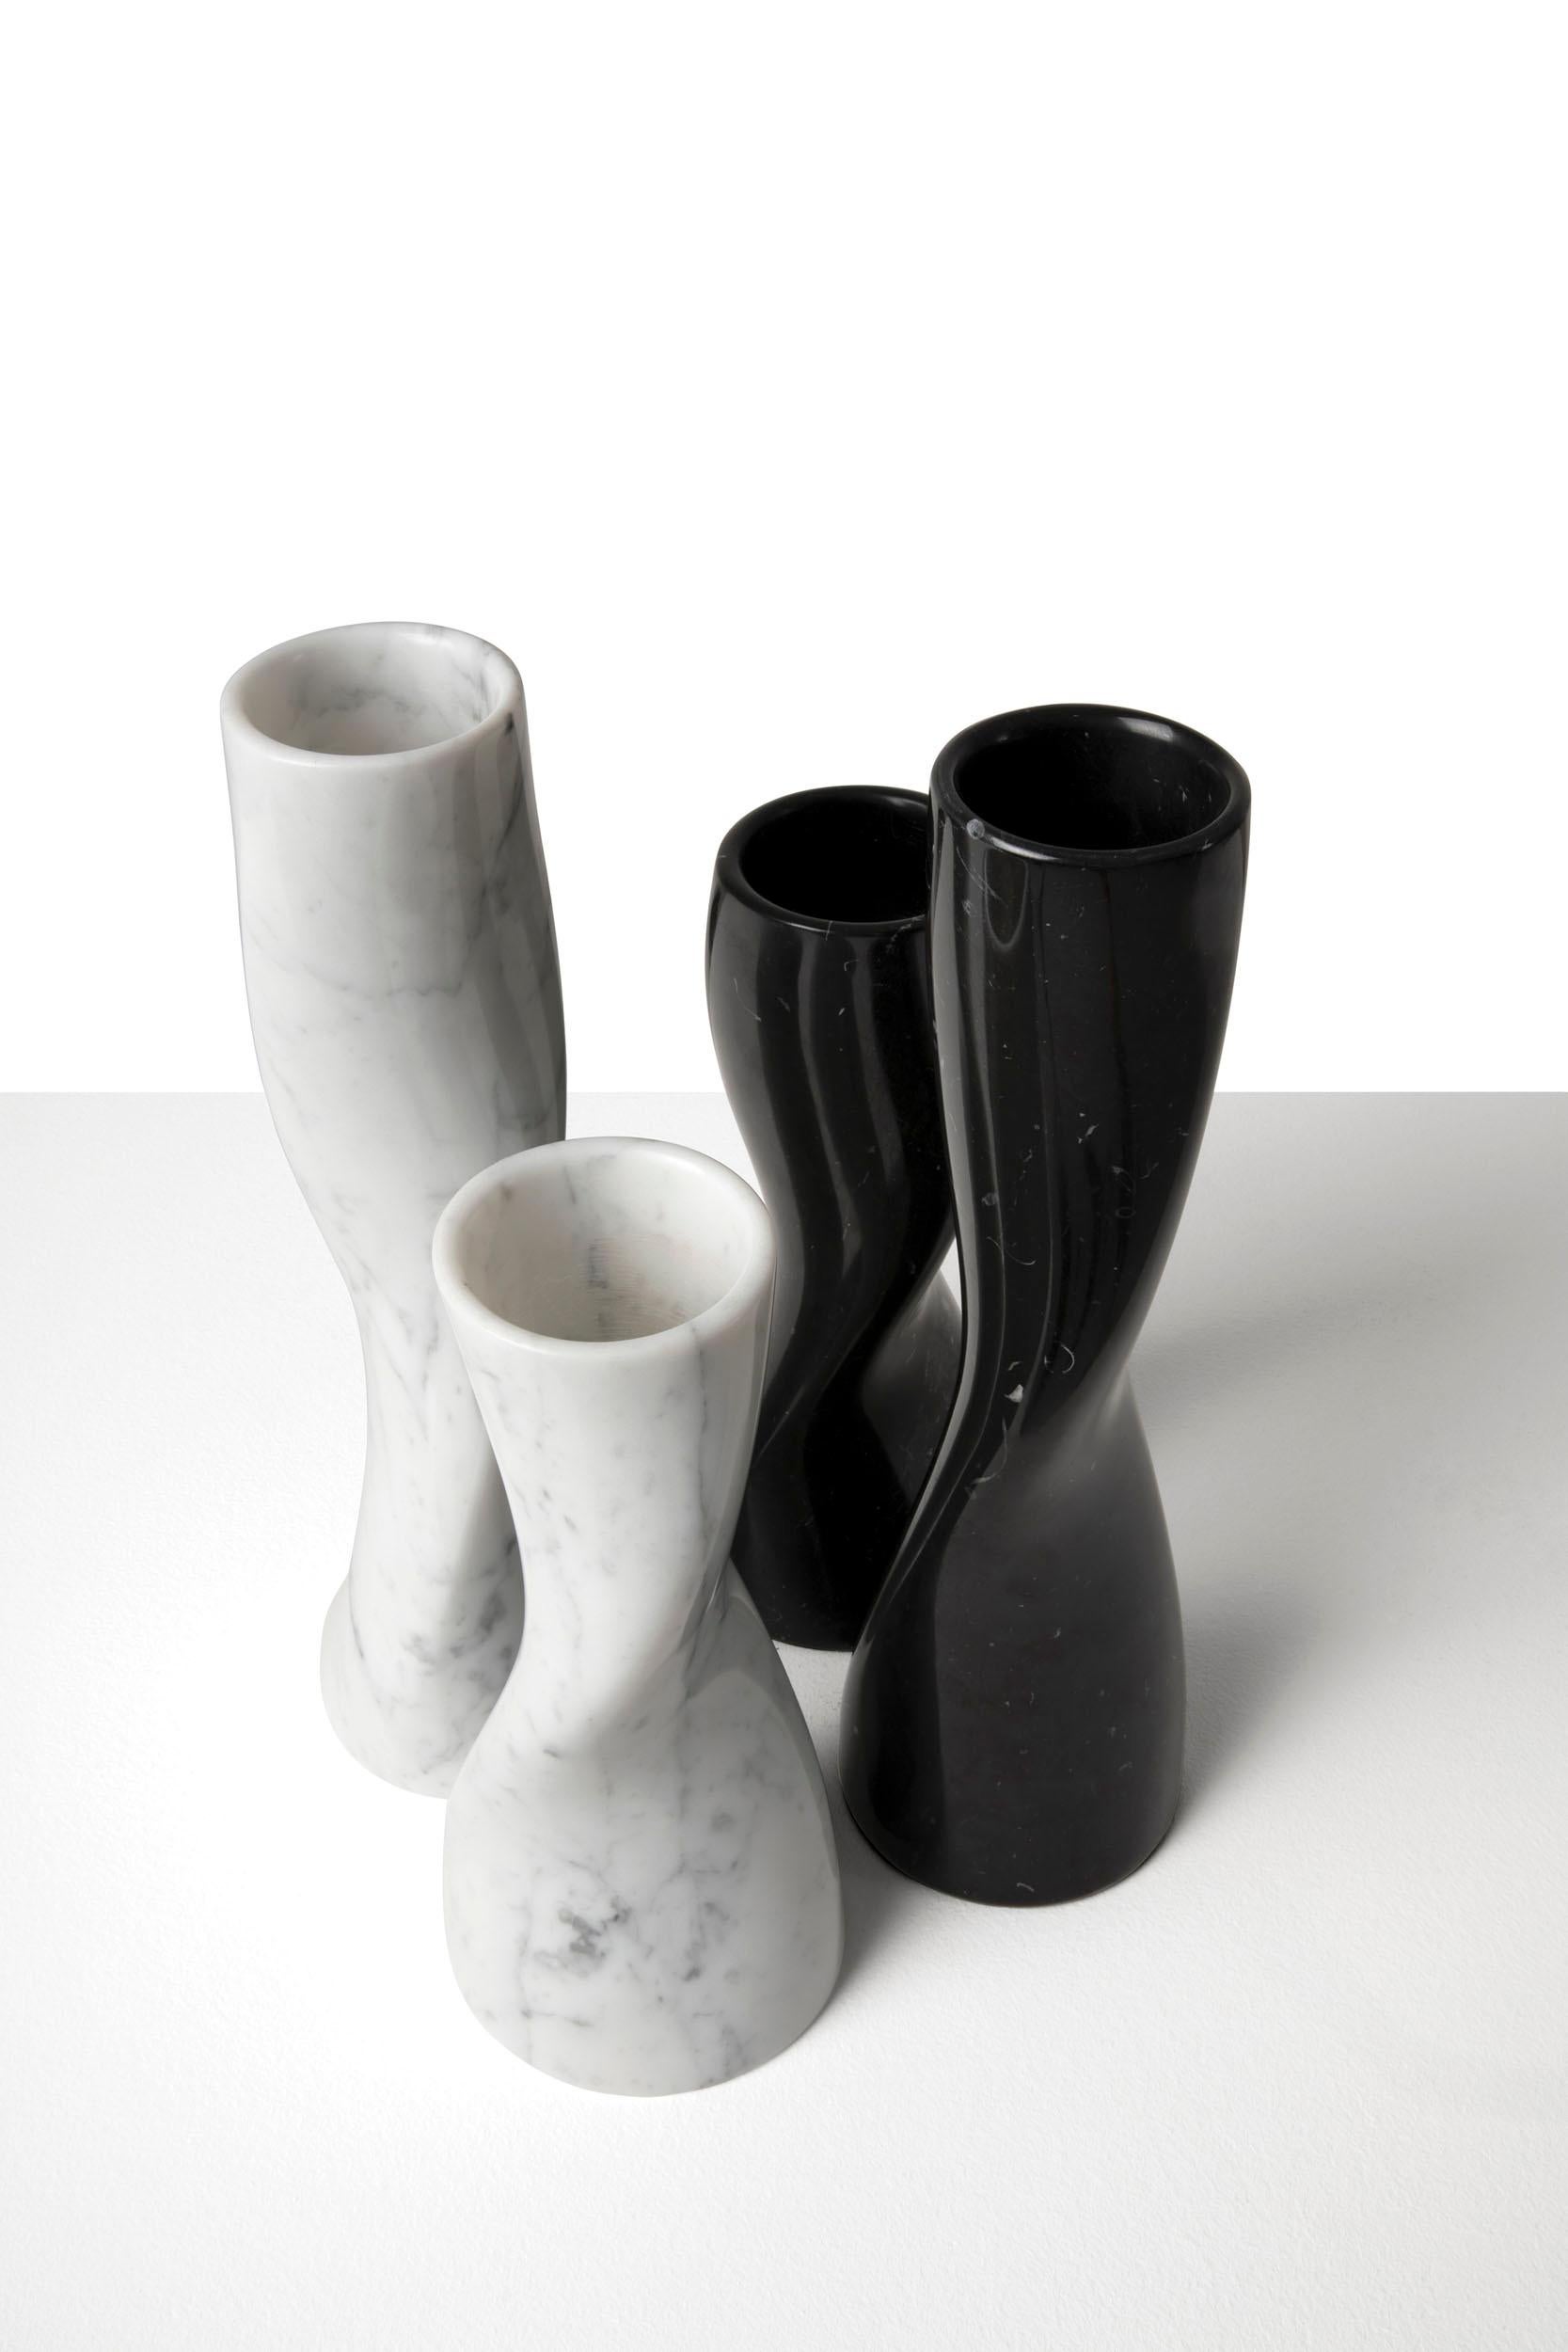 Marble vase whose sinuous shape is generated by twisting a cylinder around its main axis. It is
available in two sizes in Carrara white and Nero Marquina variants.
Hineri's shapes and choice of marble, a material as durable as it is delicate, reveal